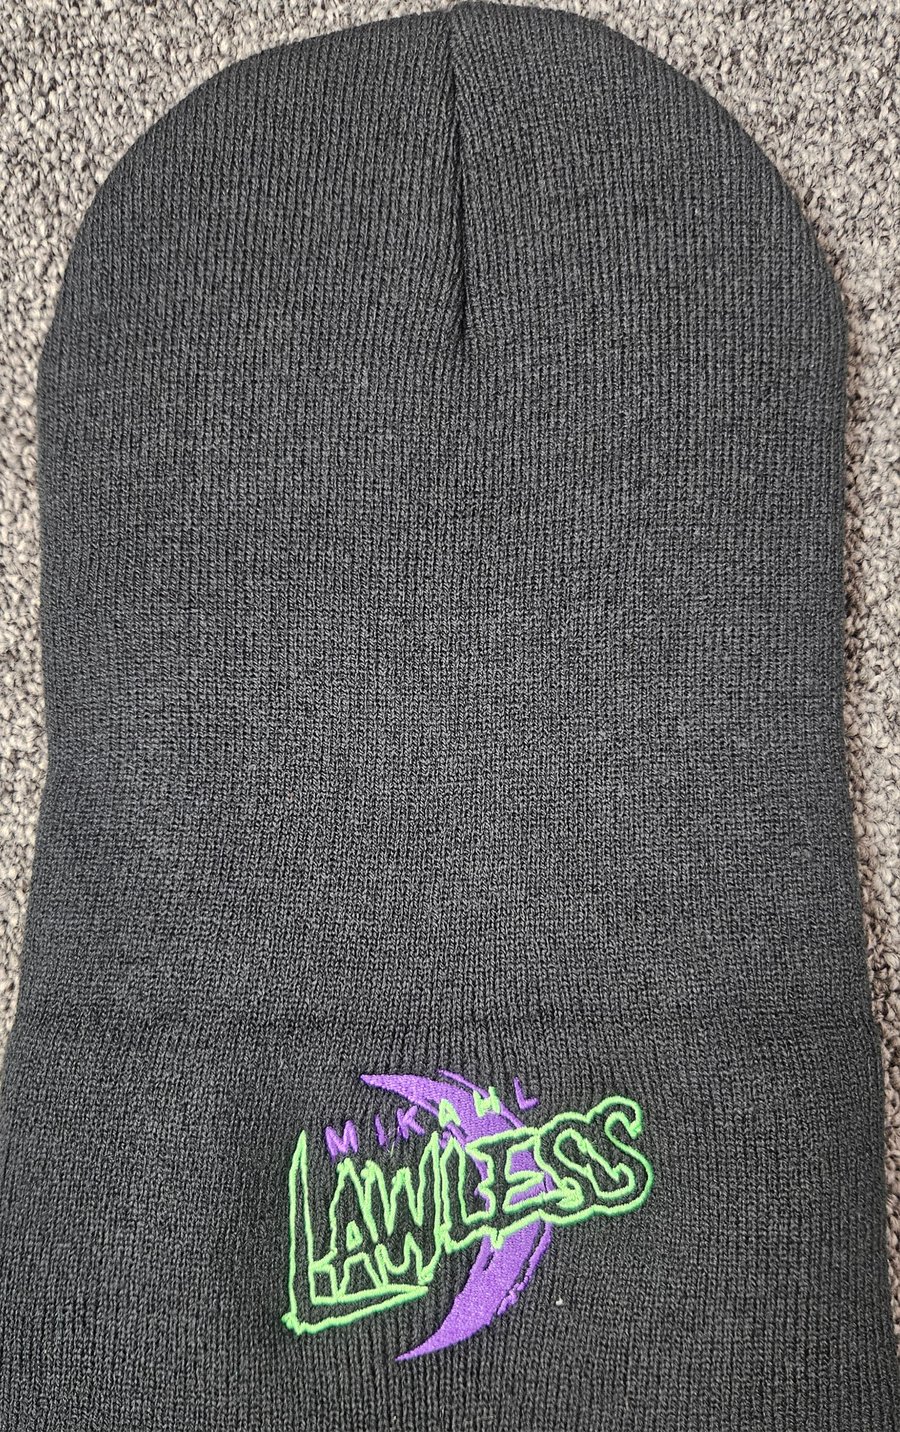 Image of MIKAHL LAWLESS: LOGO BEANIE 